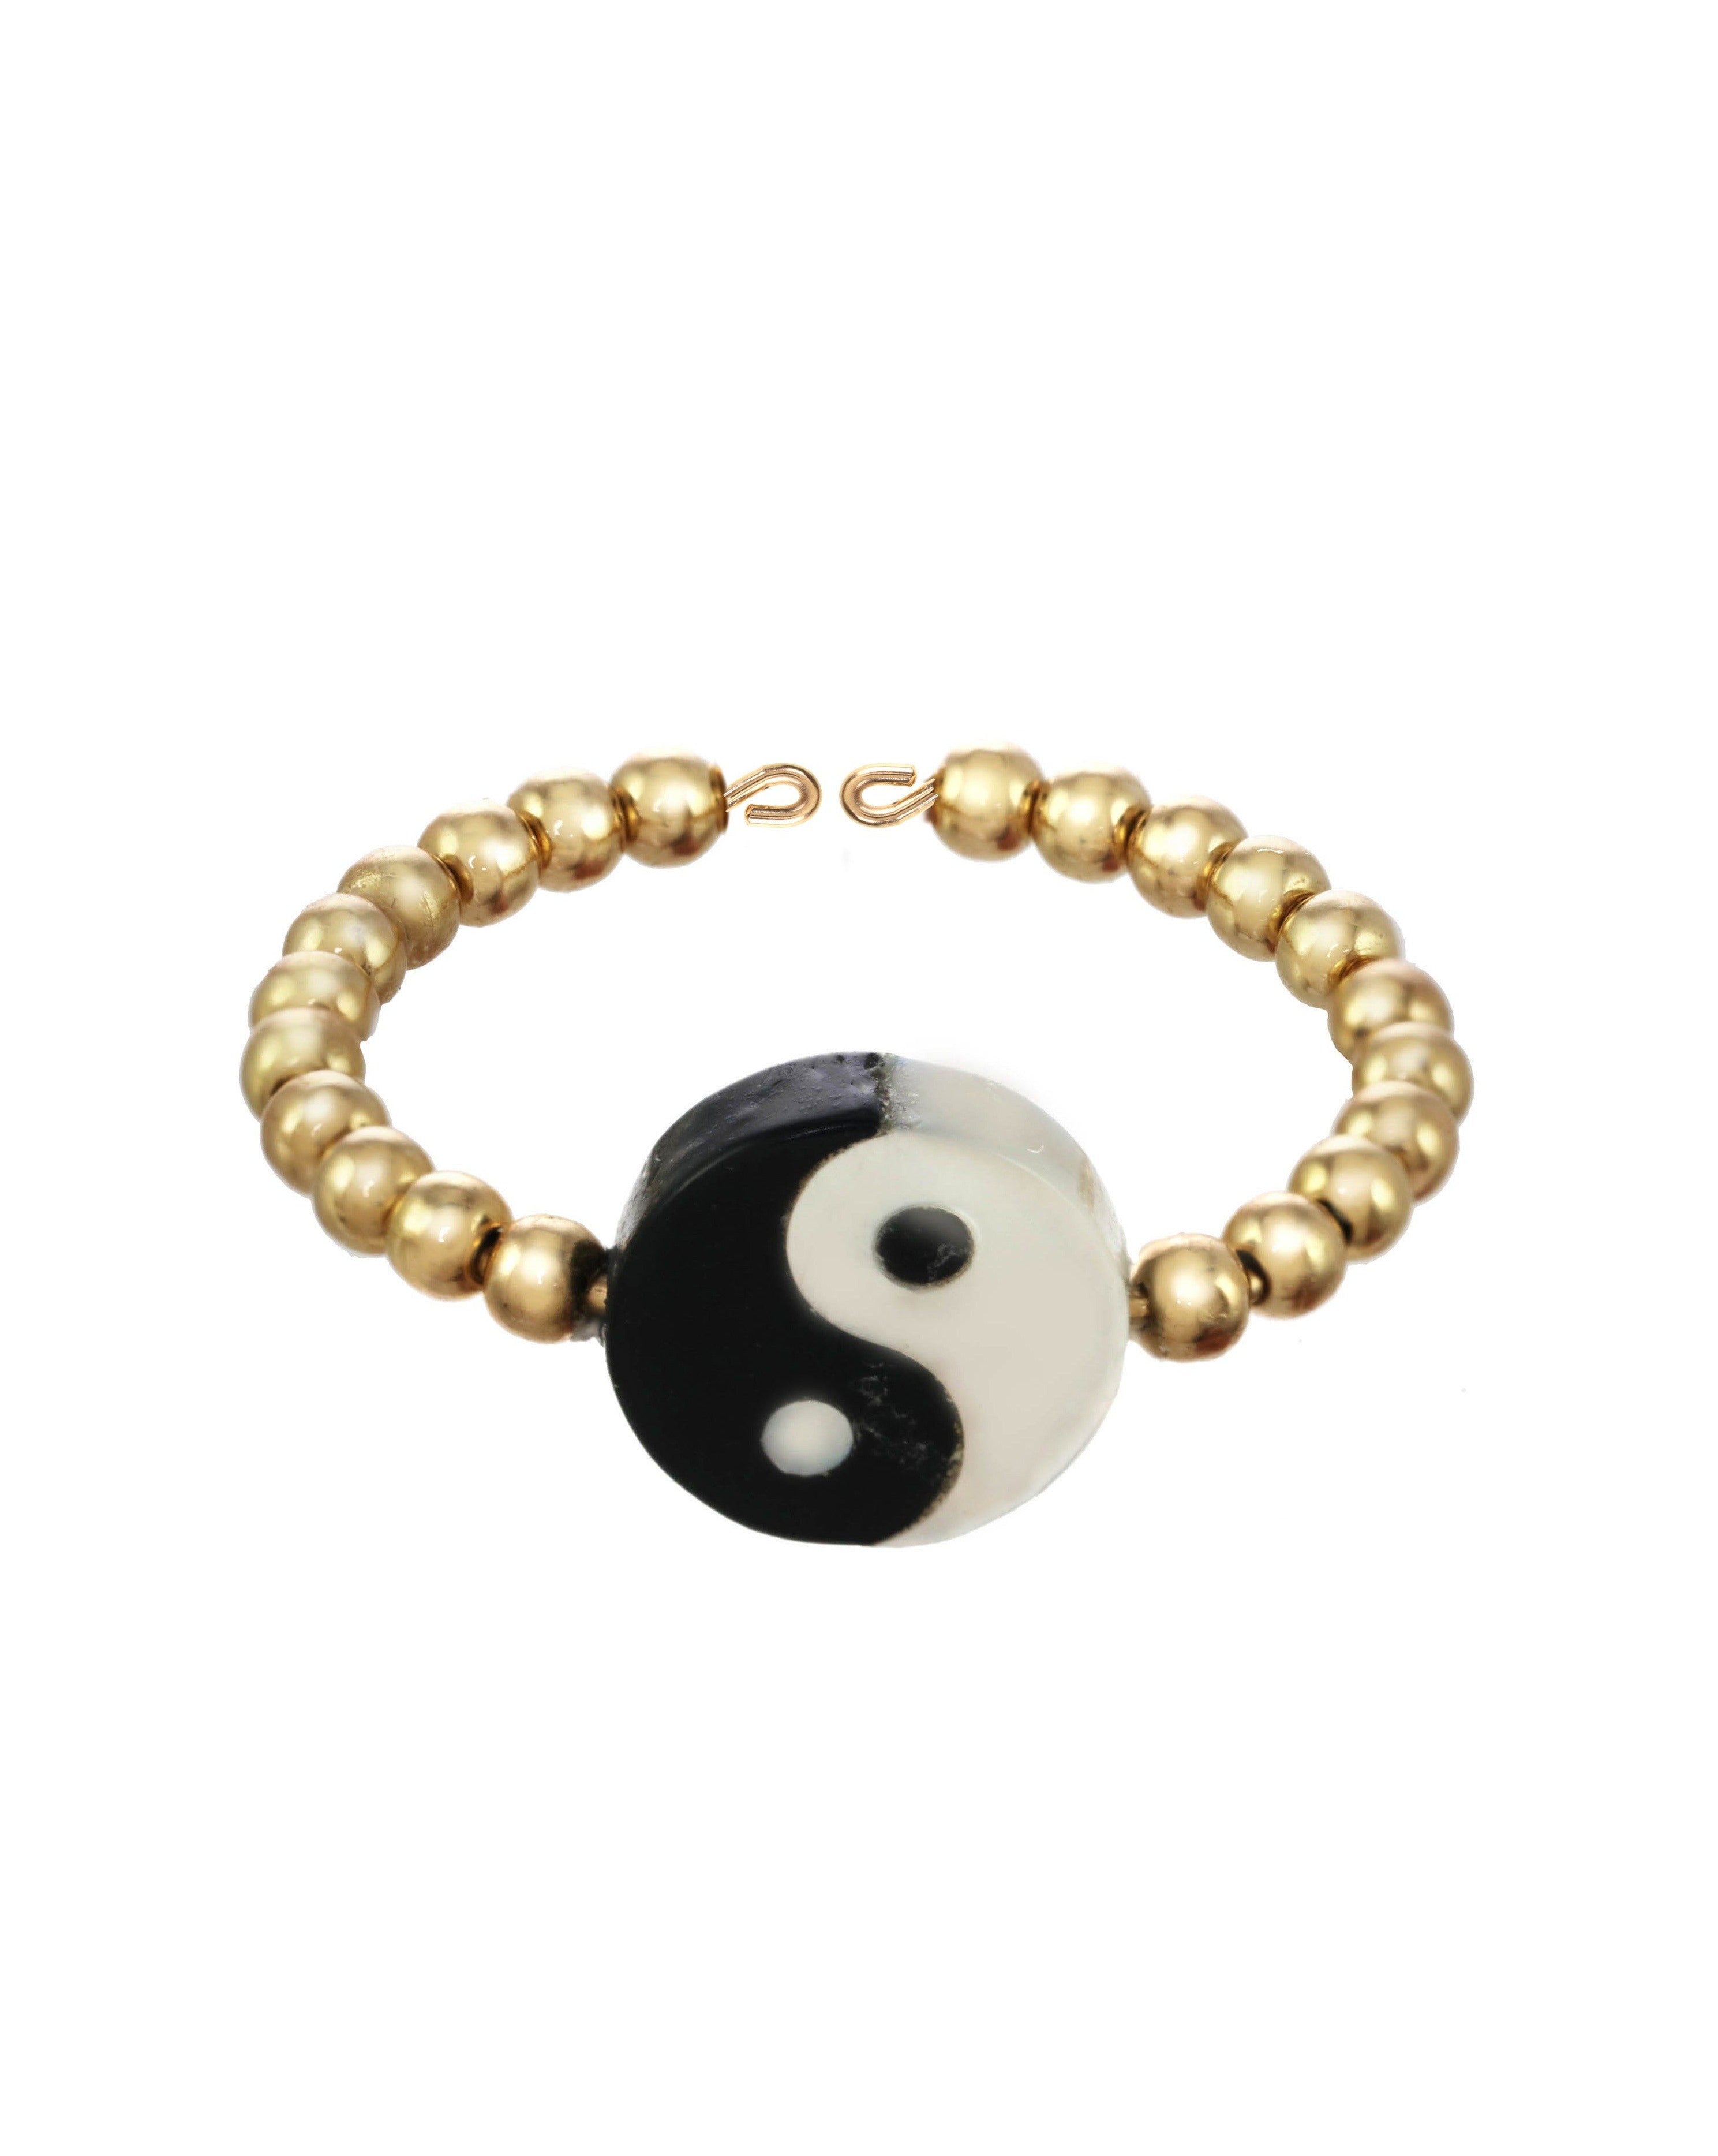 Yin Yang Ring by KOZAKH. A 2mm gold beaded band, crafted in 14K Gold Filled, featuring a hand carved Mother of pearl Yin Yang charm.